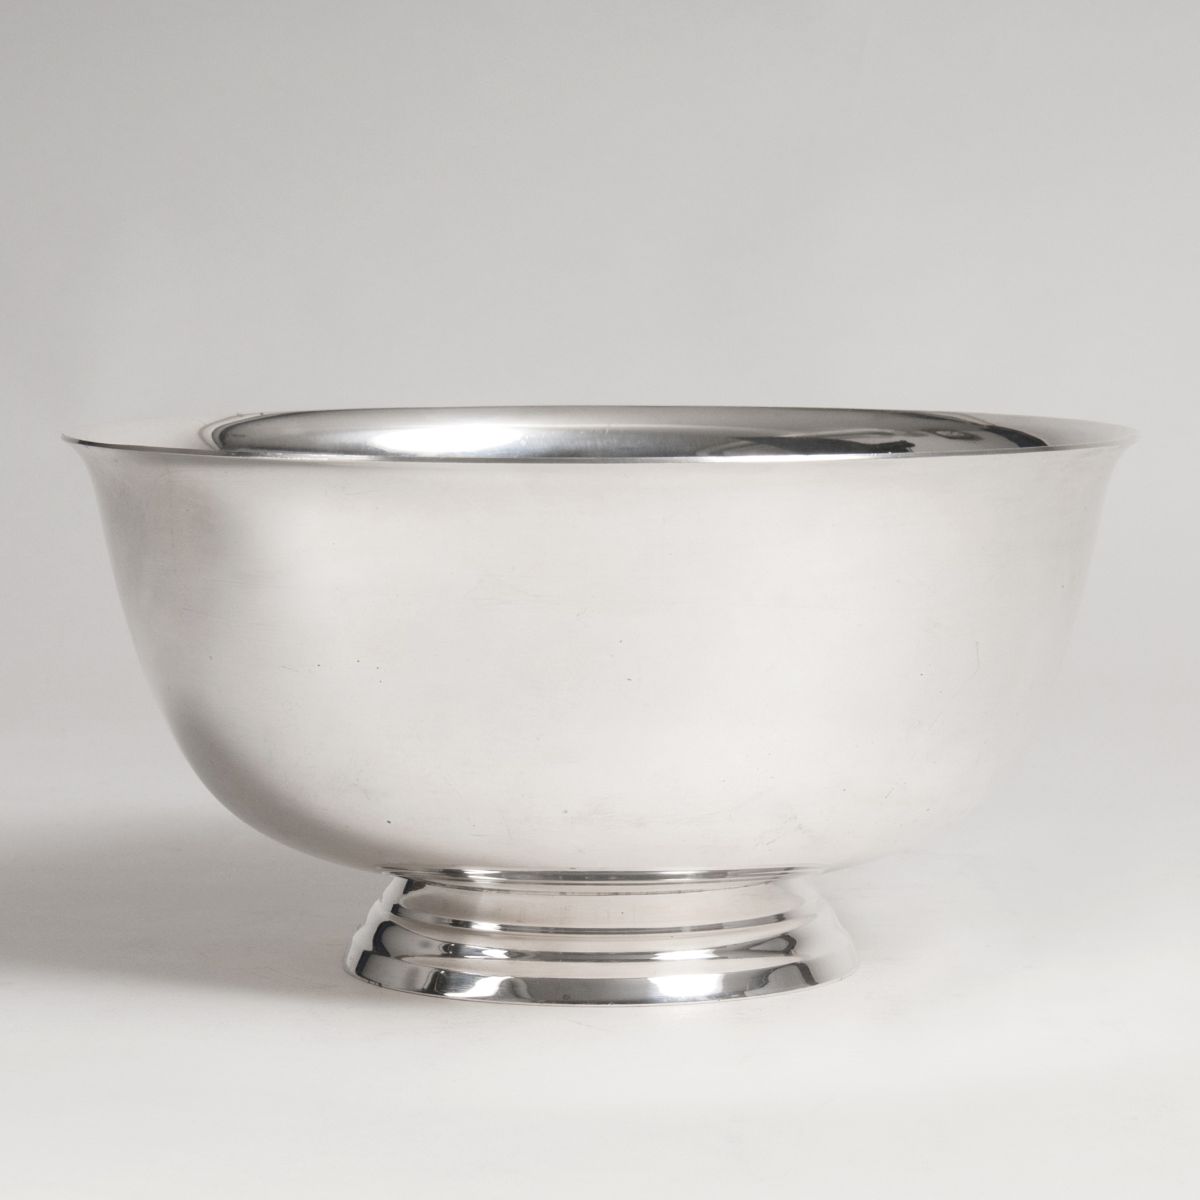 An American classical silver bowl 'Paul Revere' by Reed & Barton